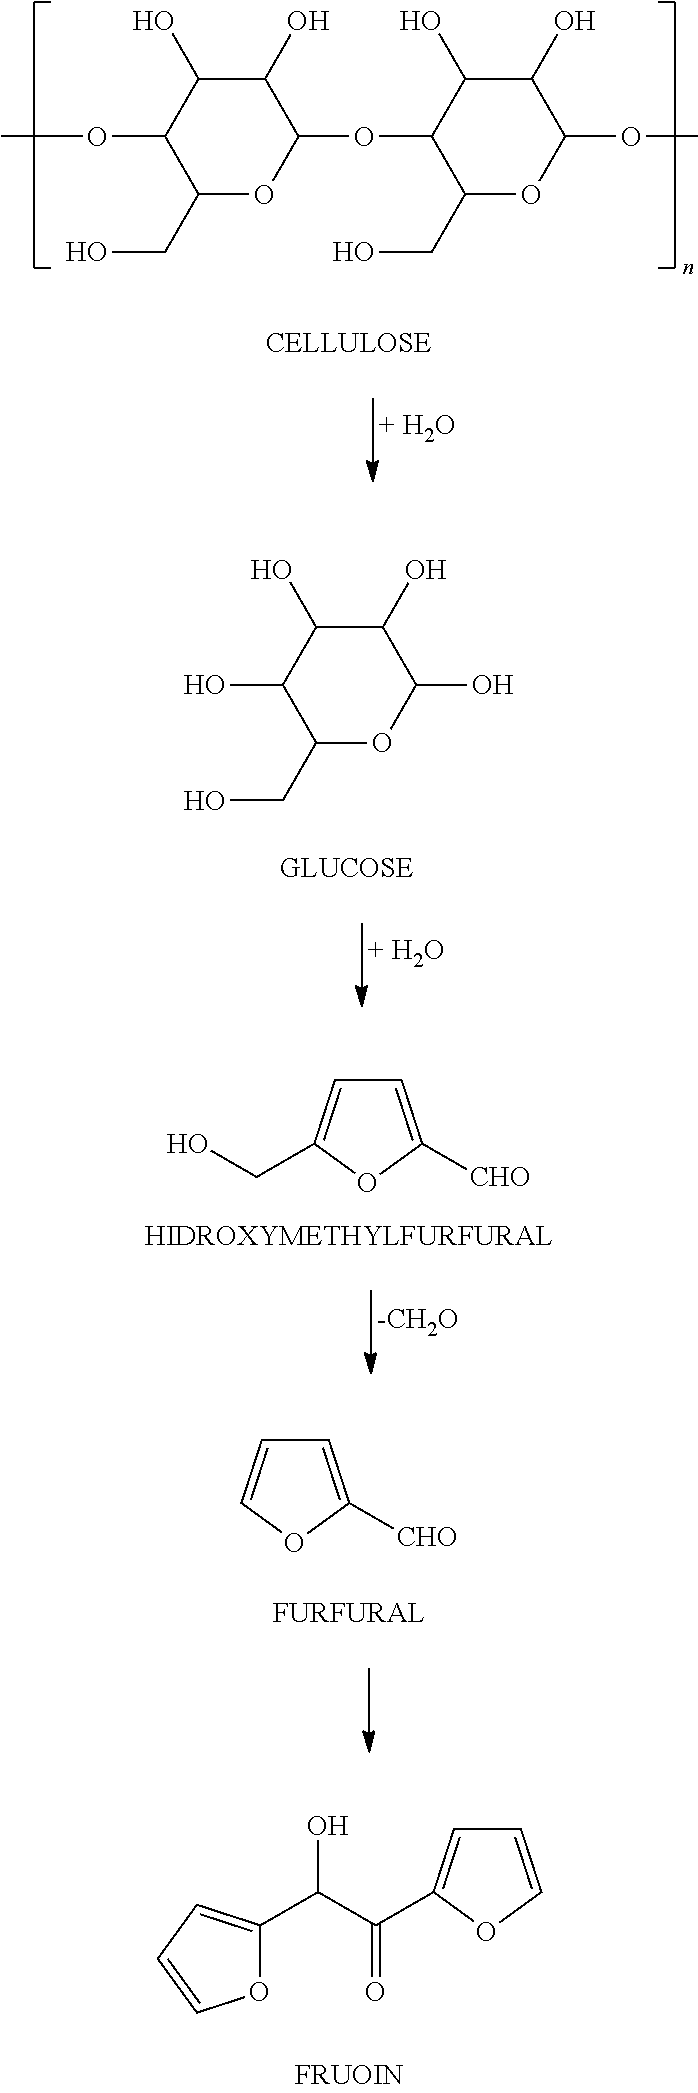 Production process of furfural from cellulose using as a solvent and catalyst an imidazolium sulphate or chloride in a reaction with simultaneous extraction with dibutyl ether